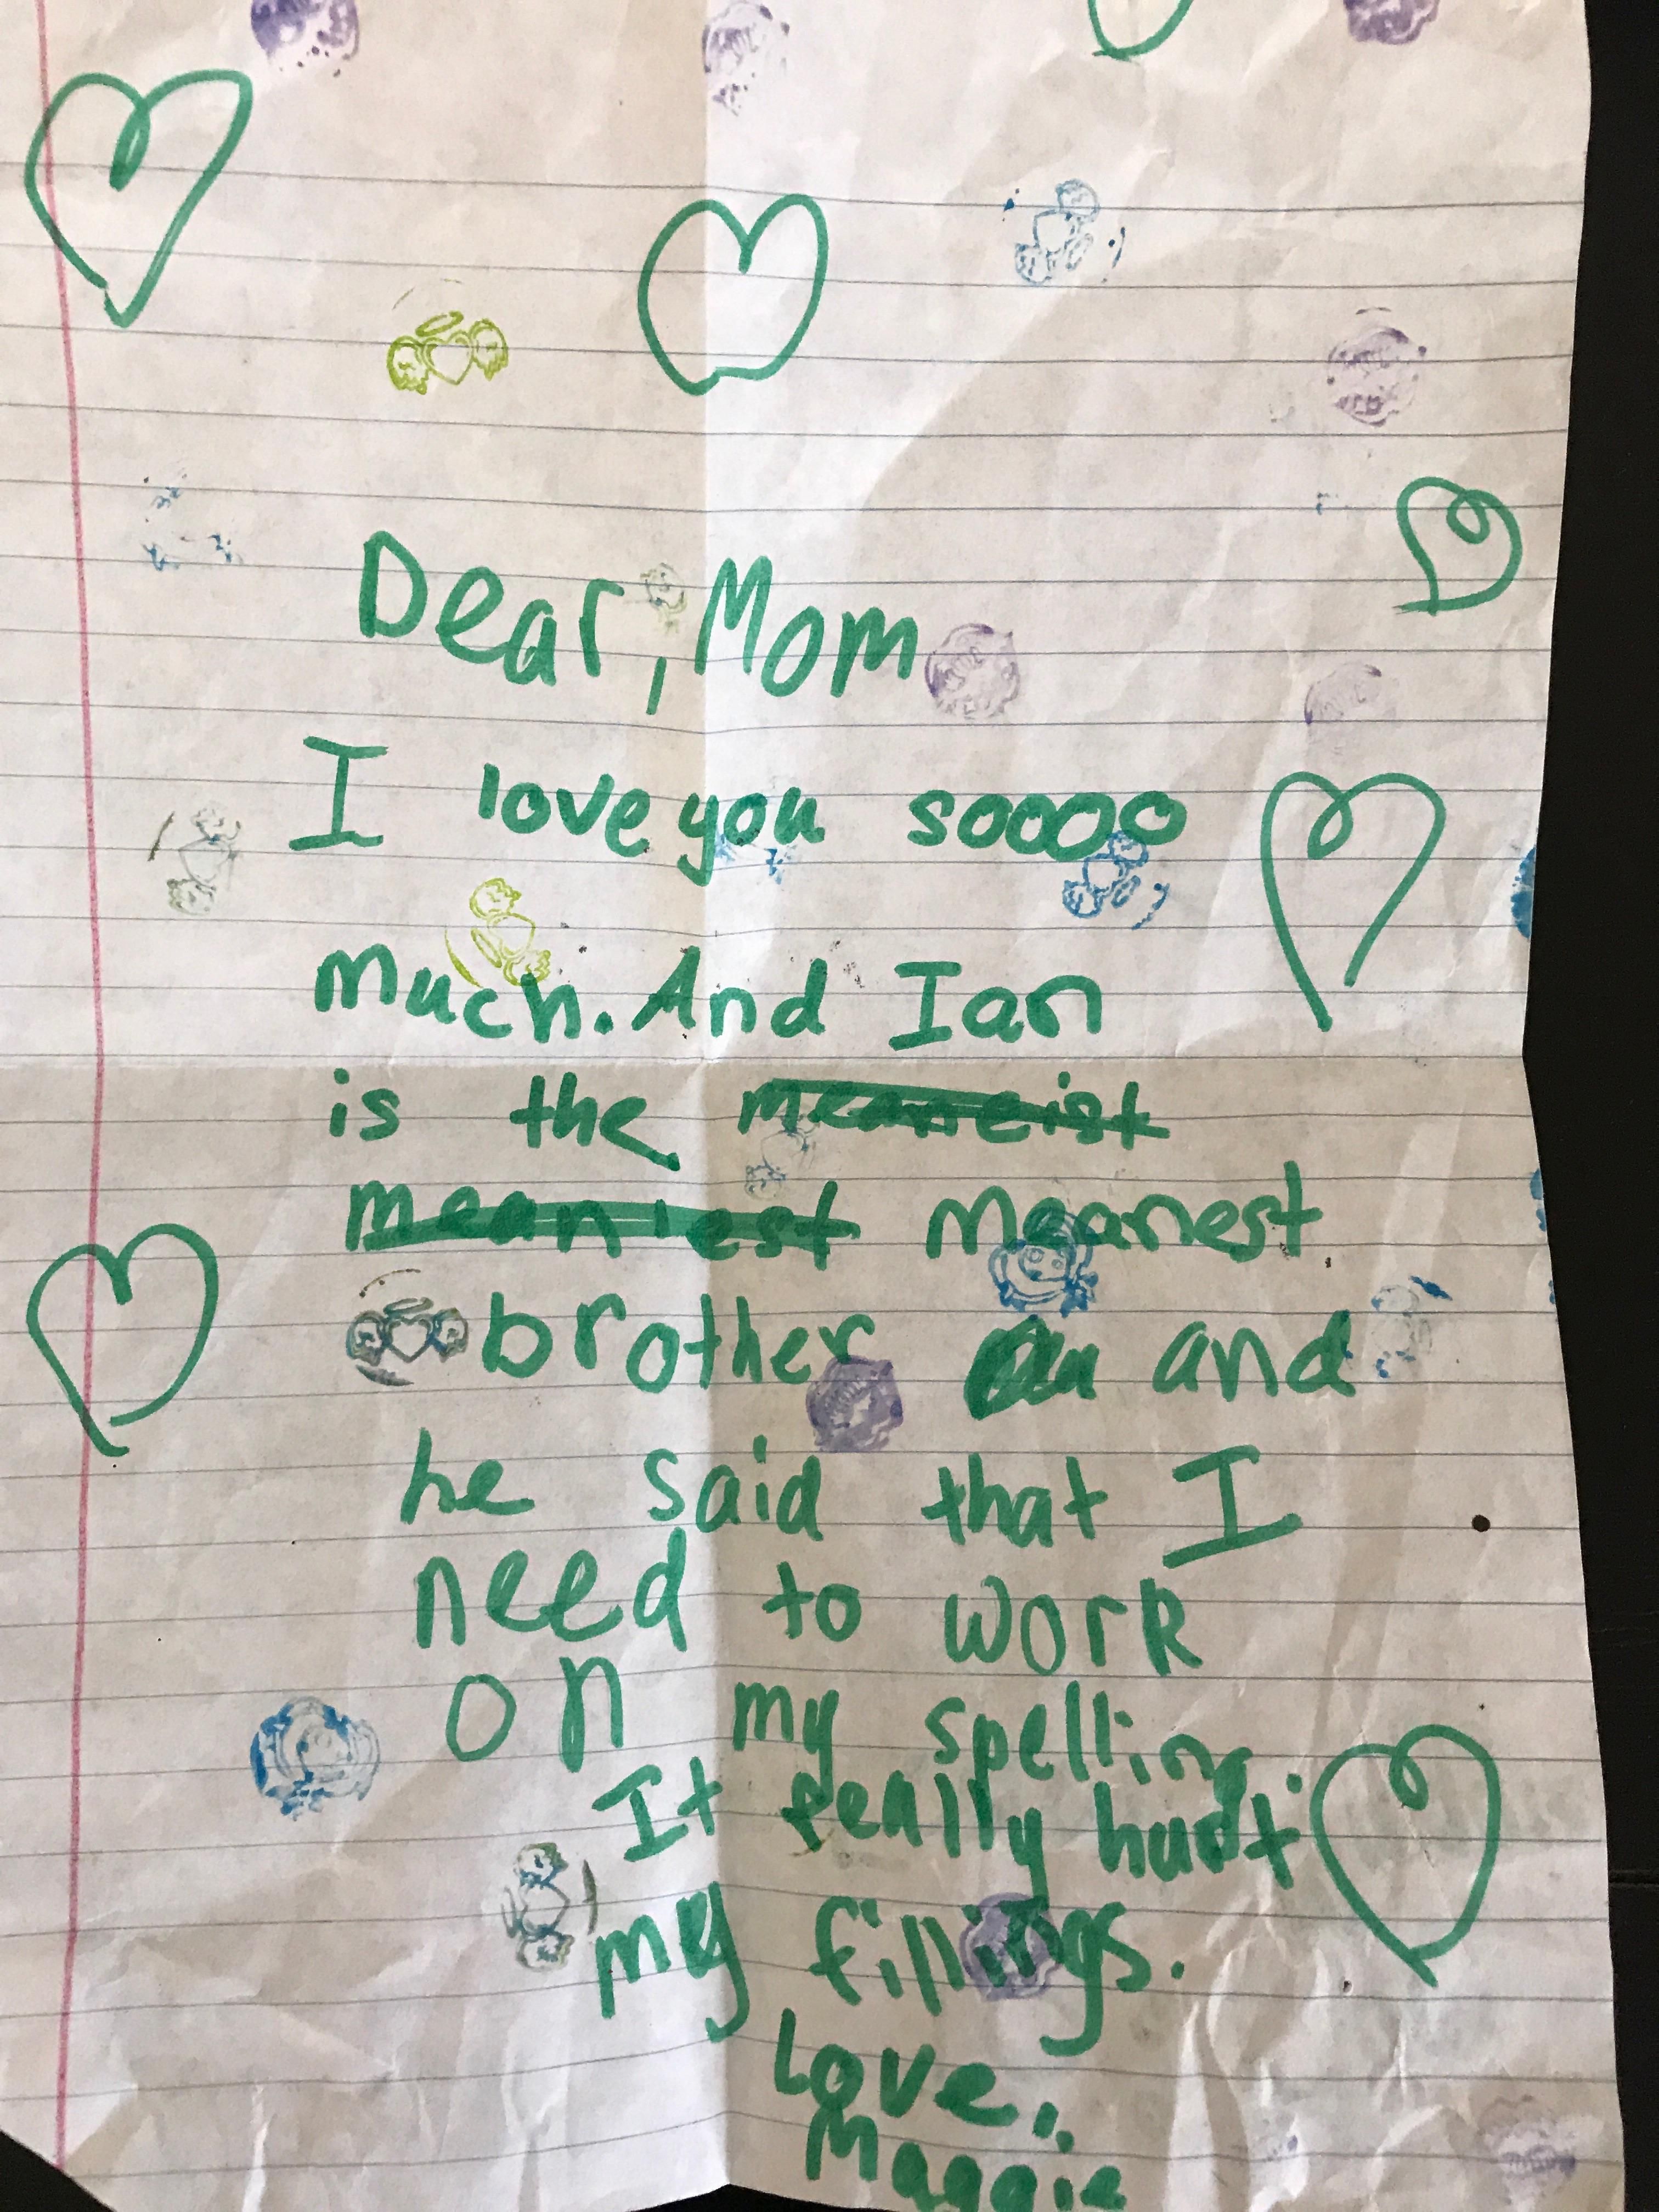 This letter my sister wrote to my mom ~15 years ago